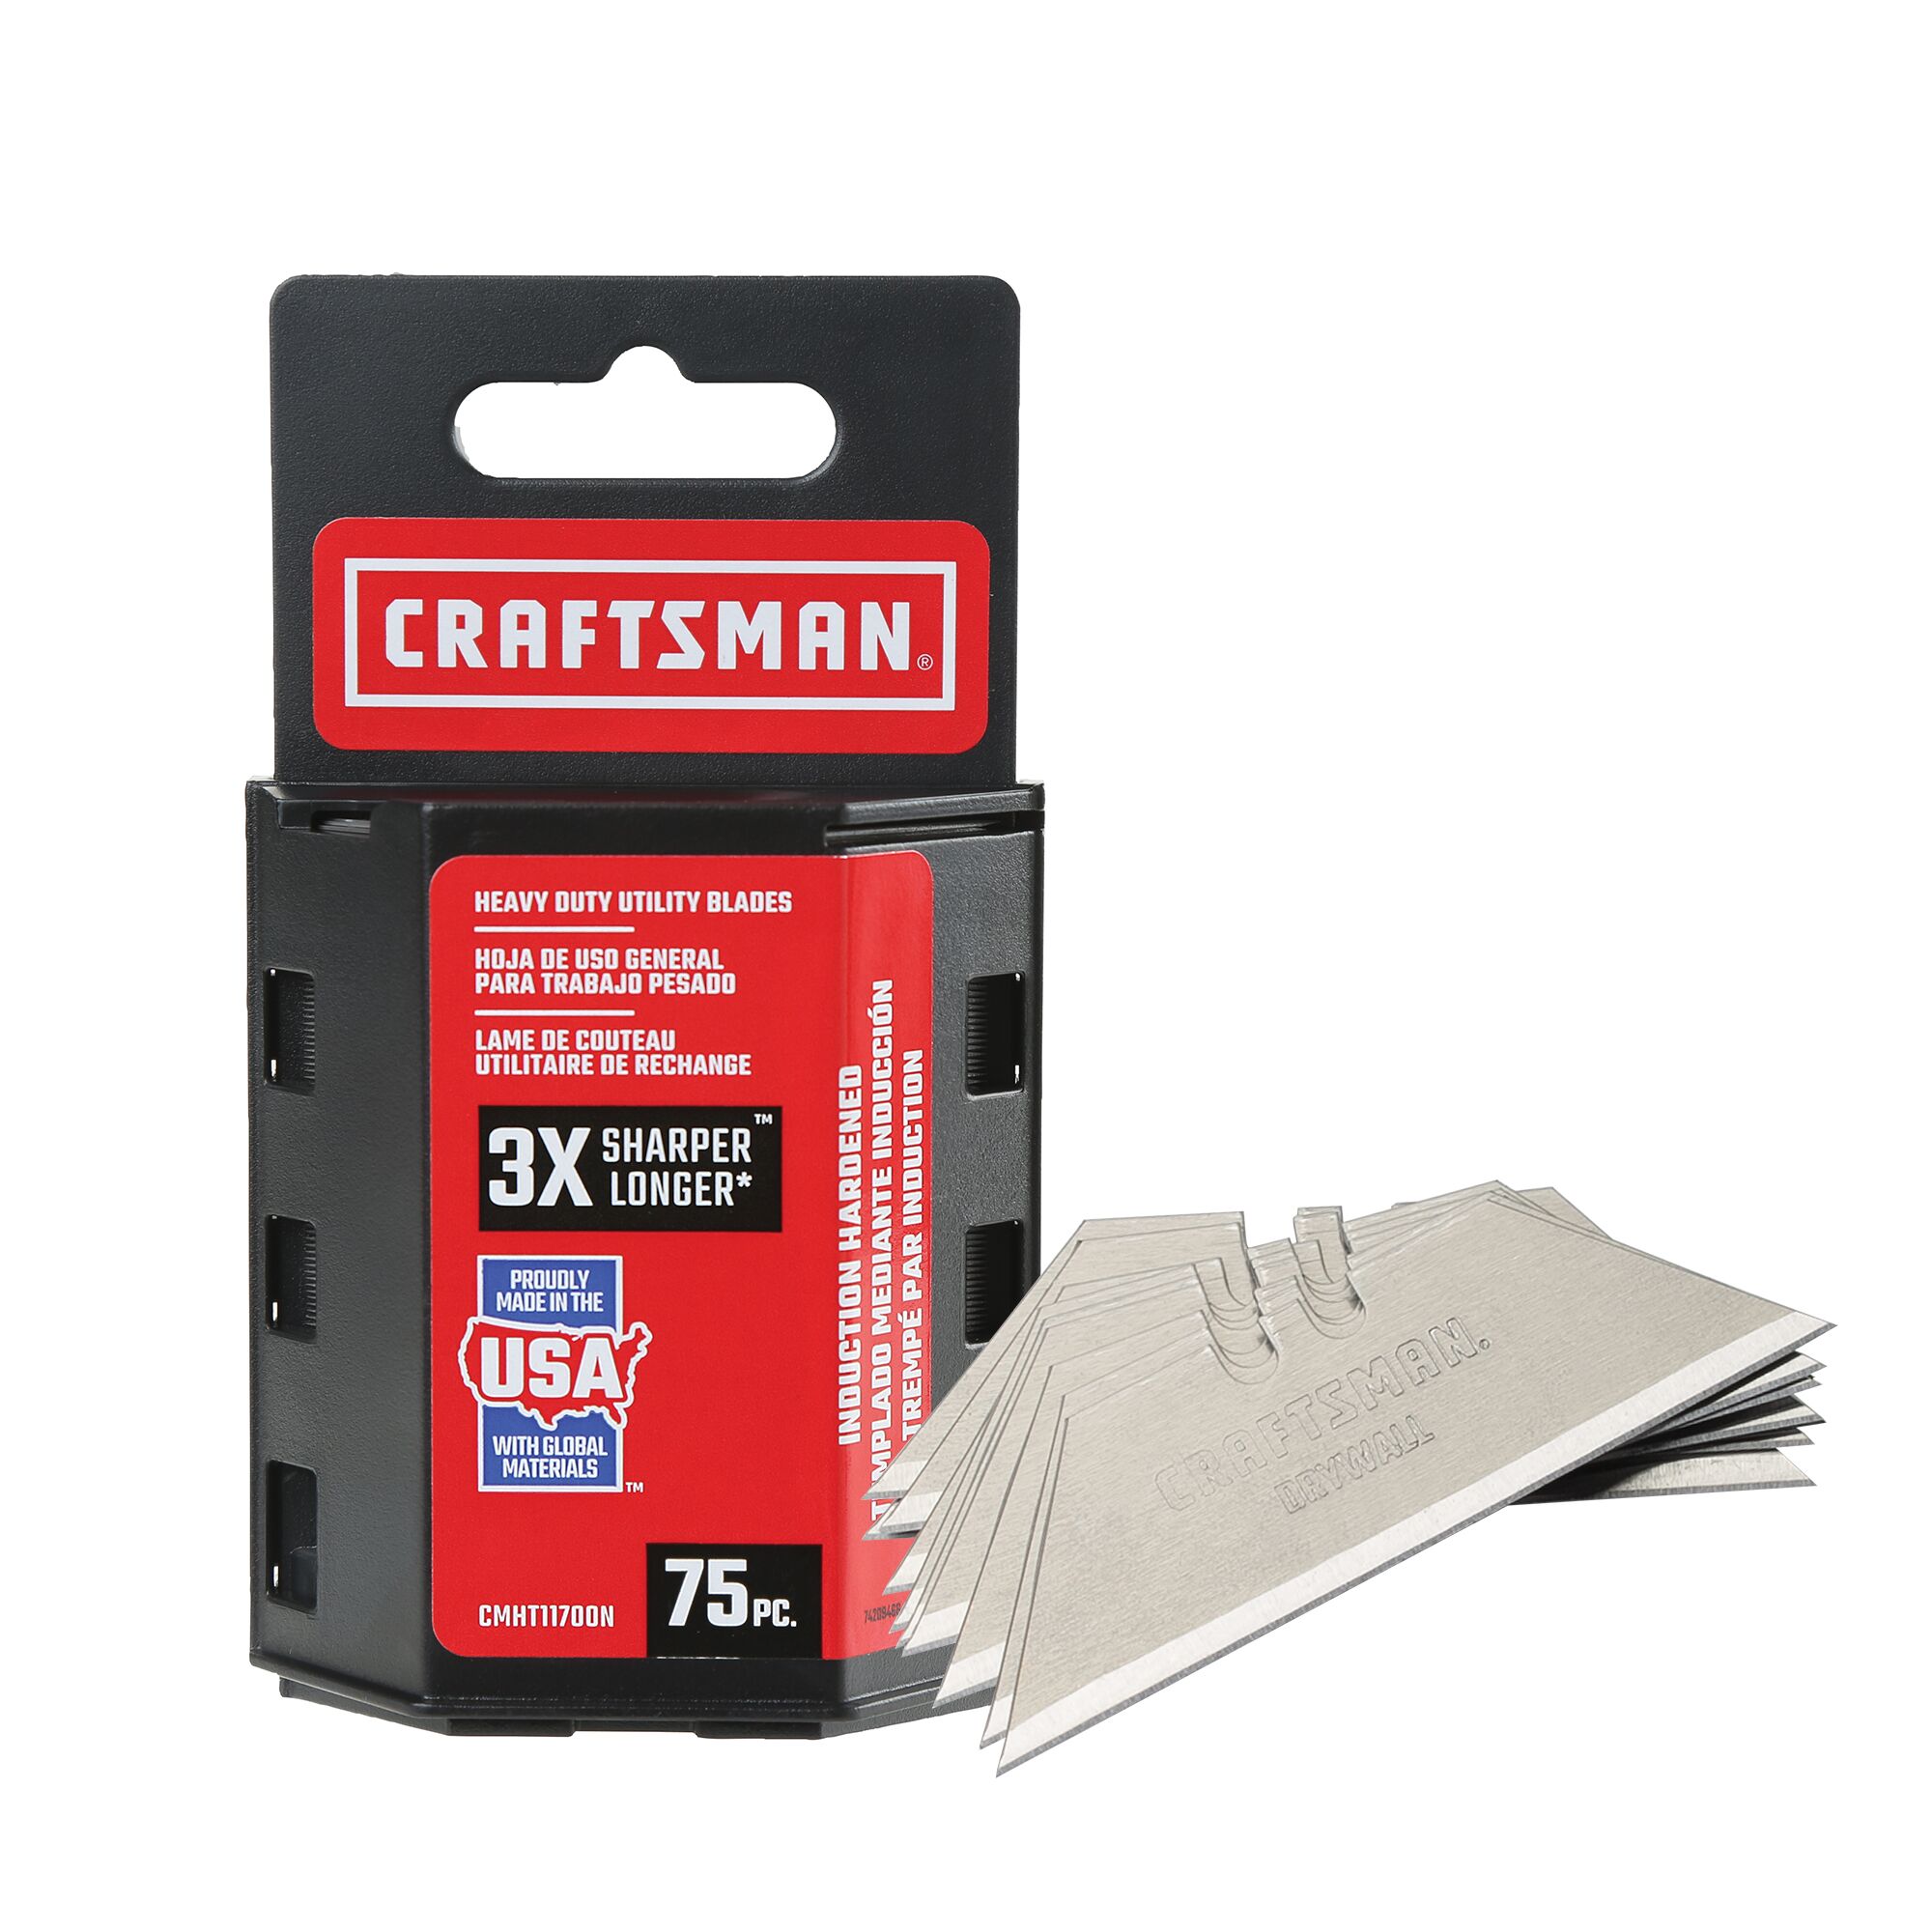 View of CRAFTSMAN Knives & Blades: Knives: Utility packaging